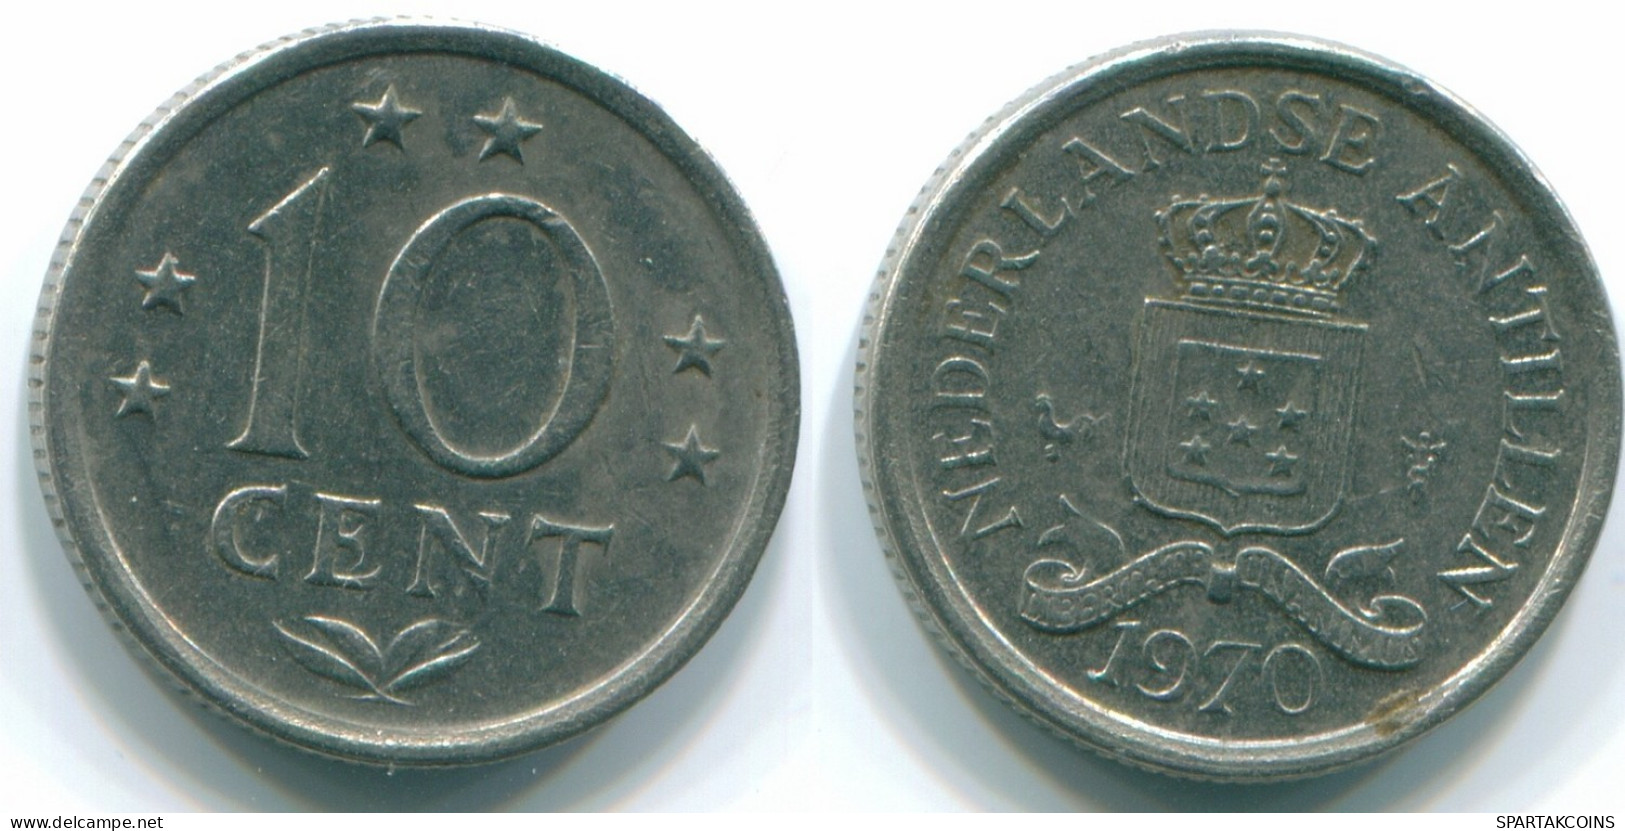 10 CENTS 1970 NETHERLANDS ANTILLES Nickel Colonial Coin #S13327.U.A - Netherlands Antilles